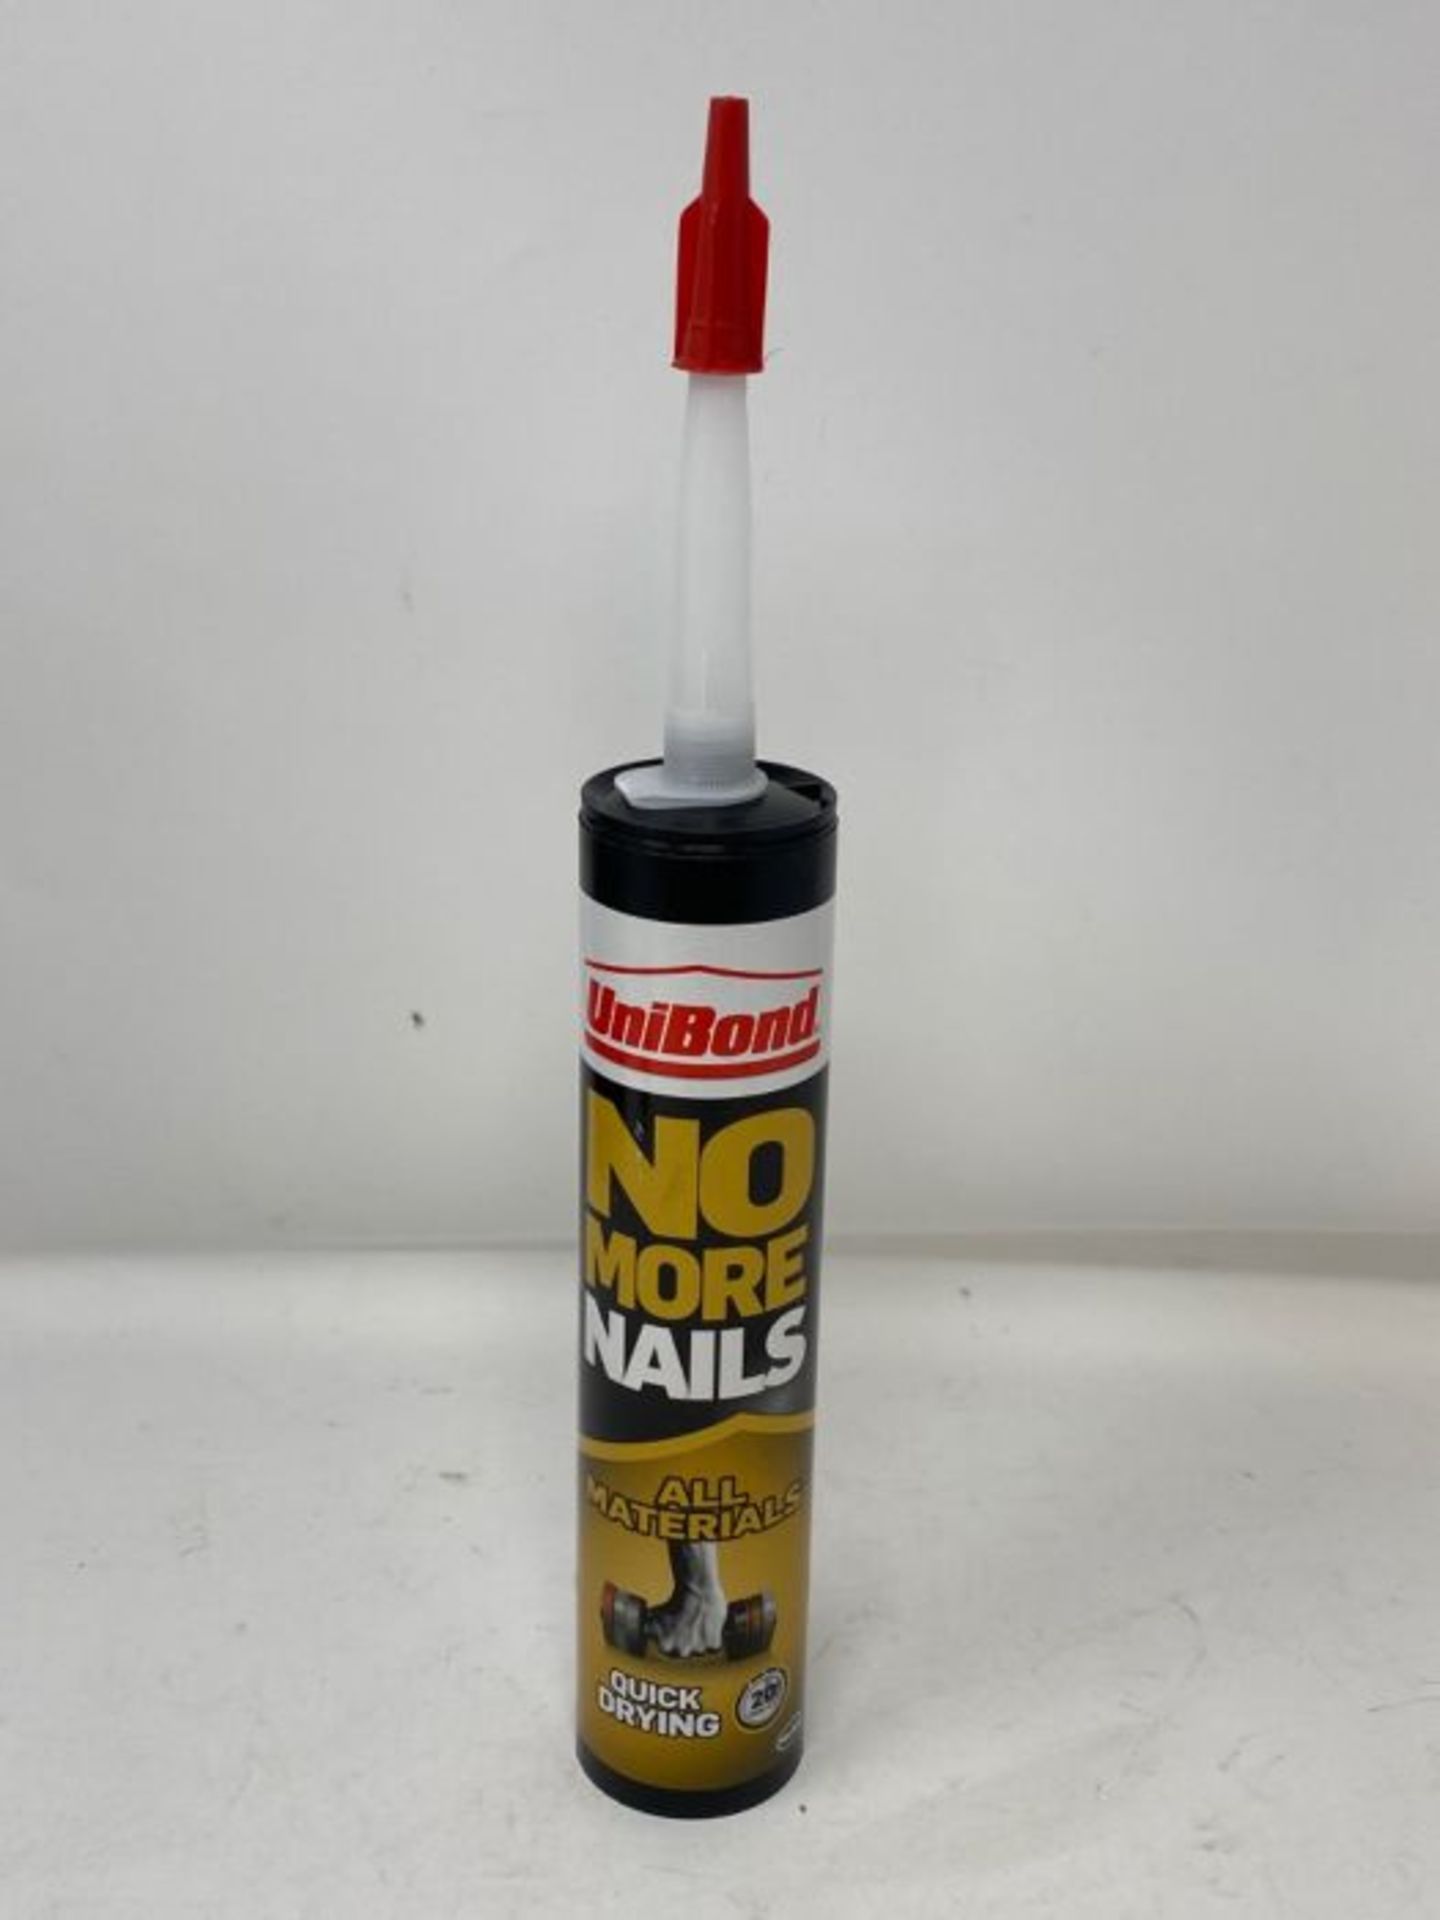 UniBond 2492937 No More Nails All Materials Quick Drying Construction Adhesive, All Ma - Image 2 of 3